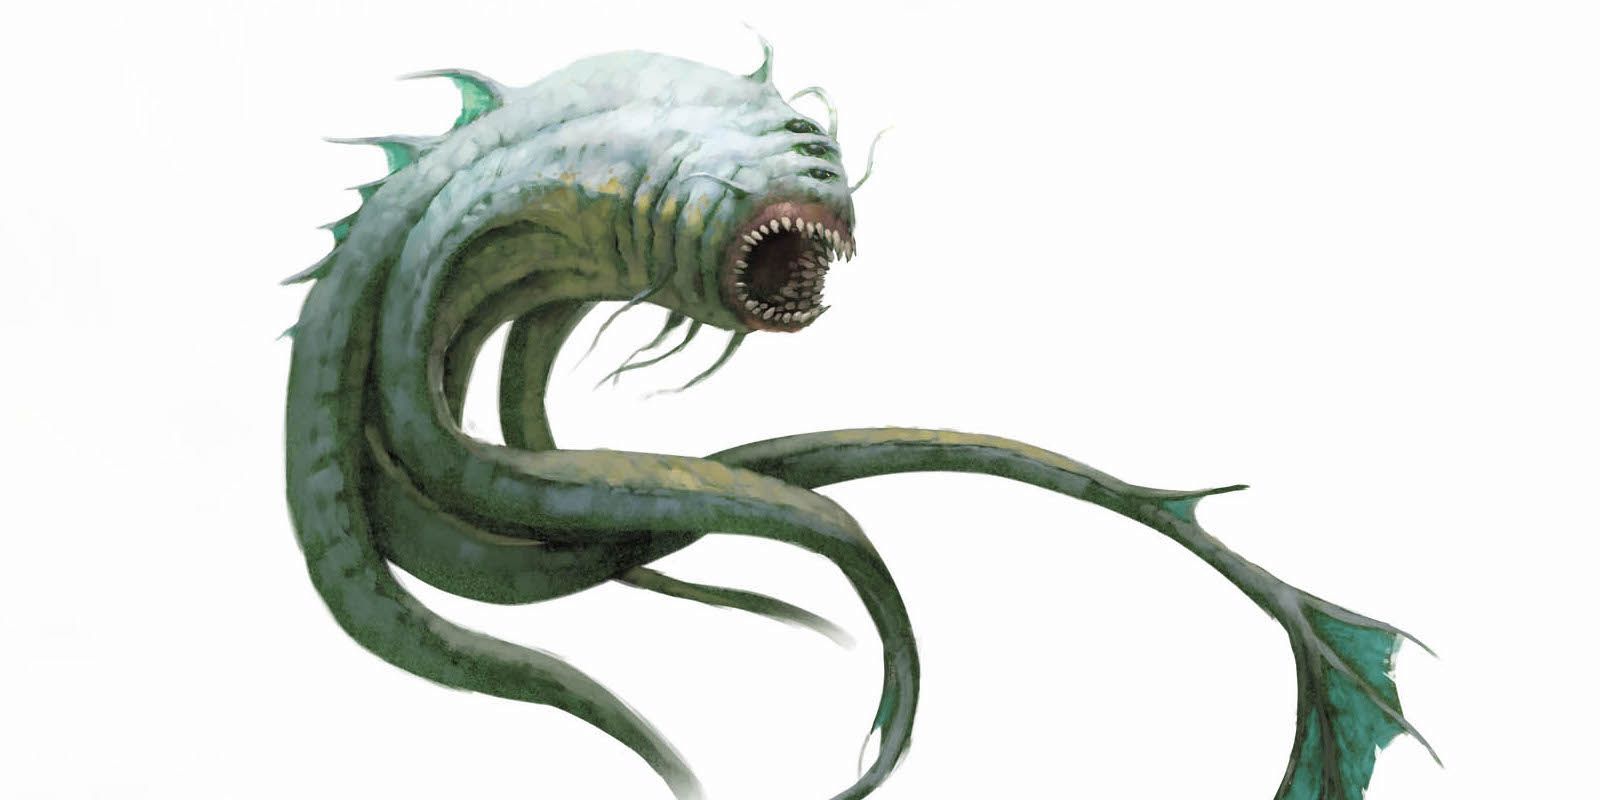 The scariest monster in all of Dungeons & Dragons #dnd #dnd5e #ttrpg #